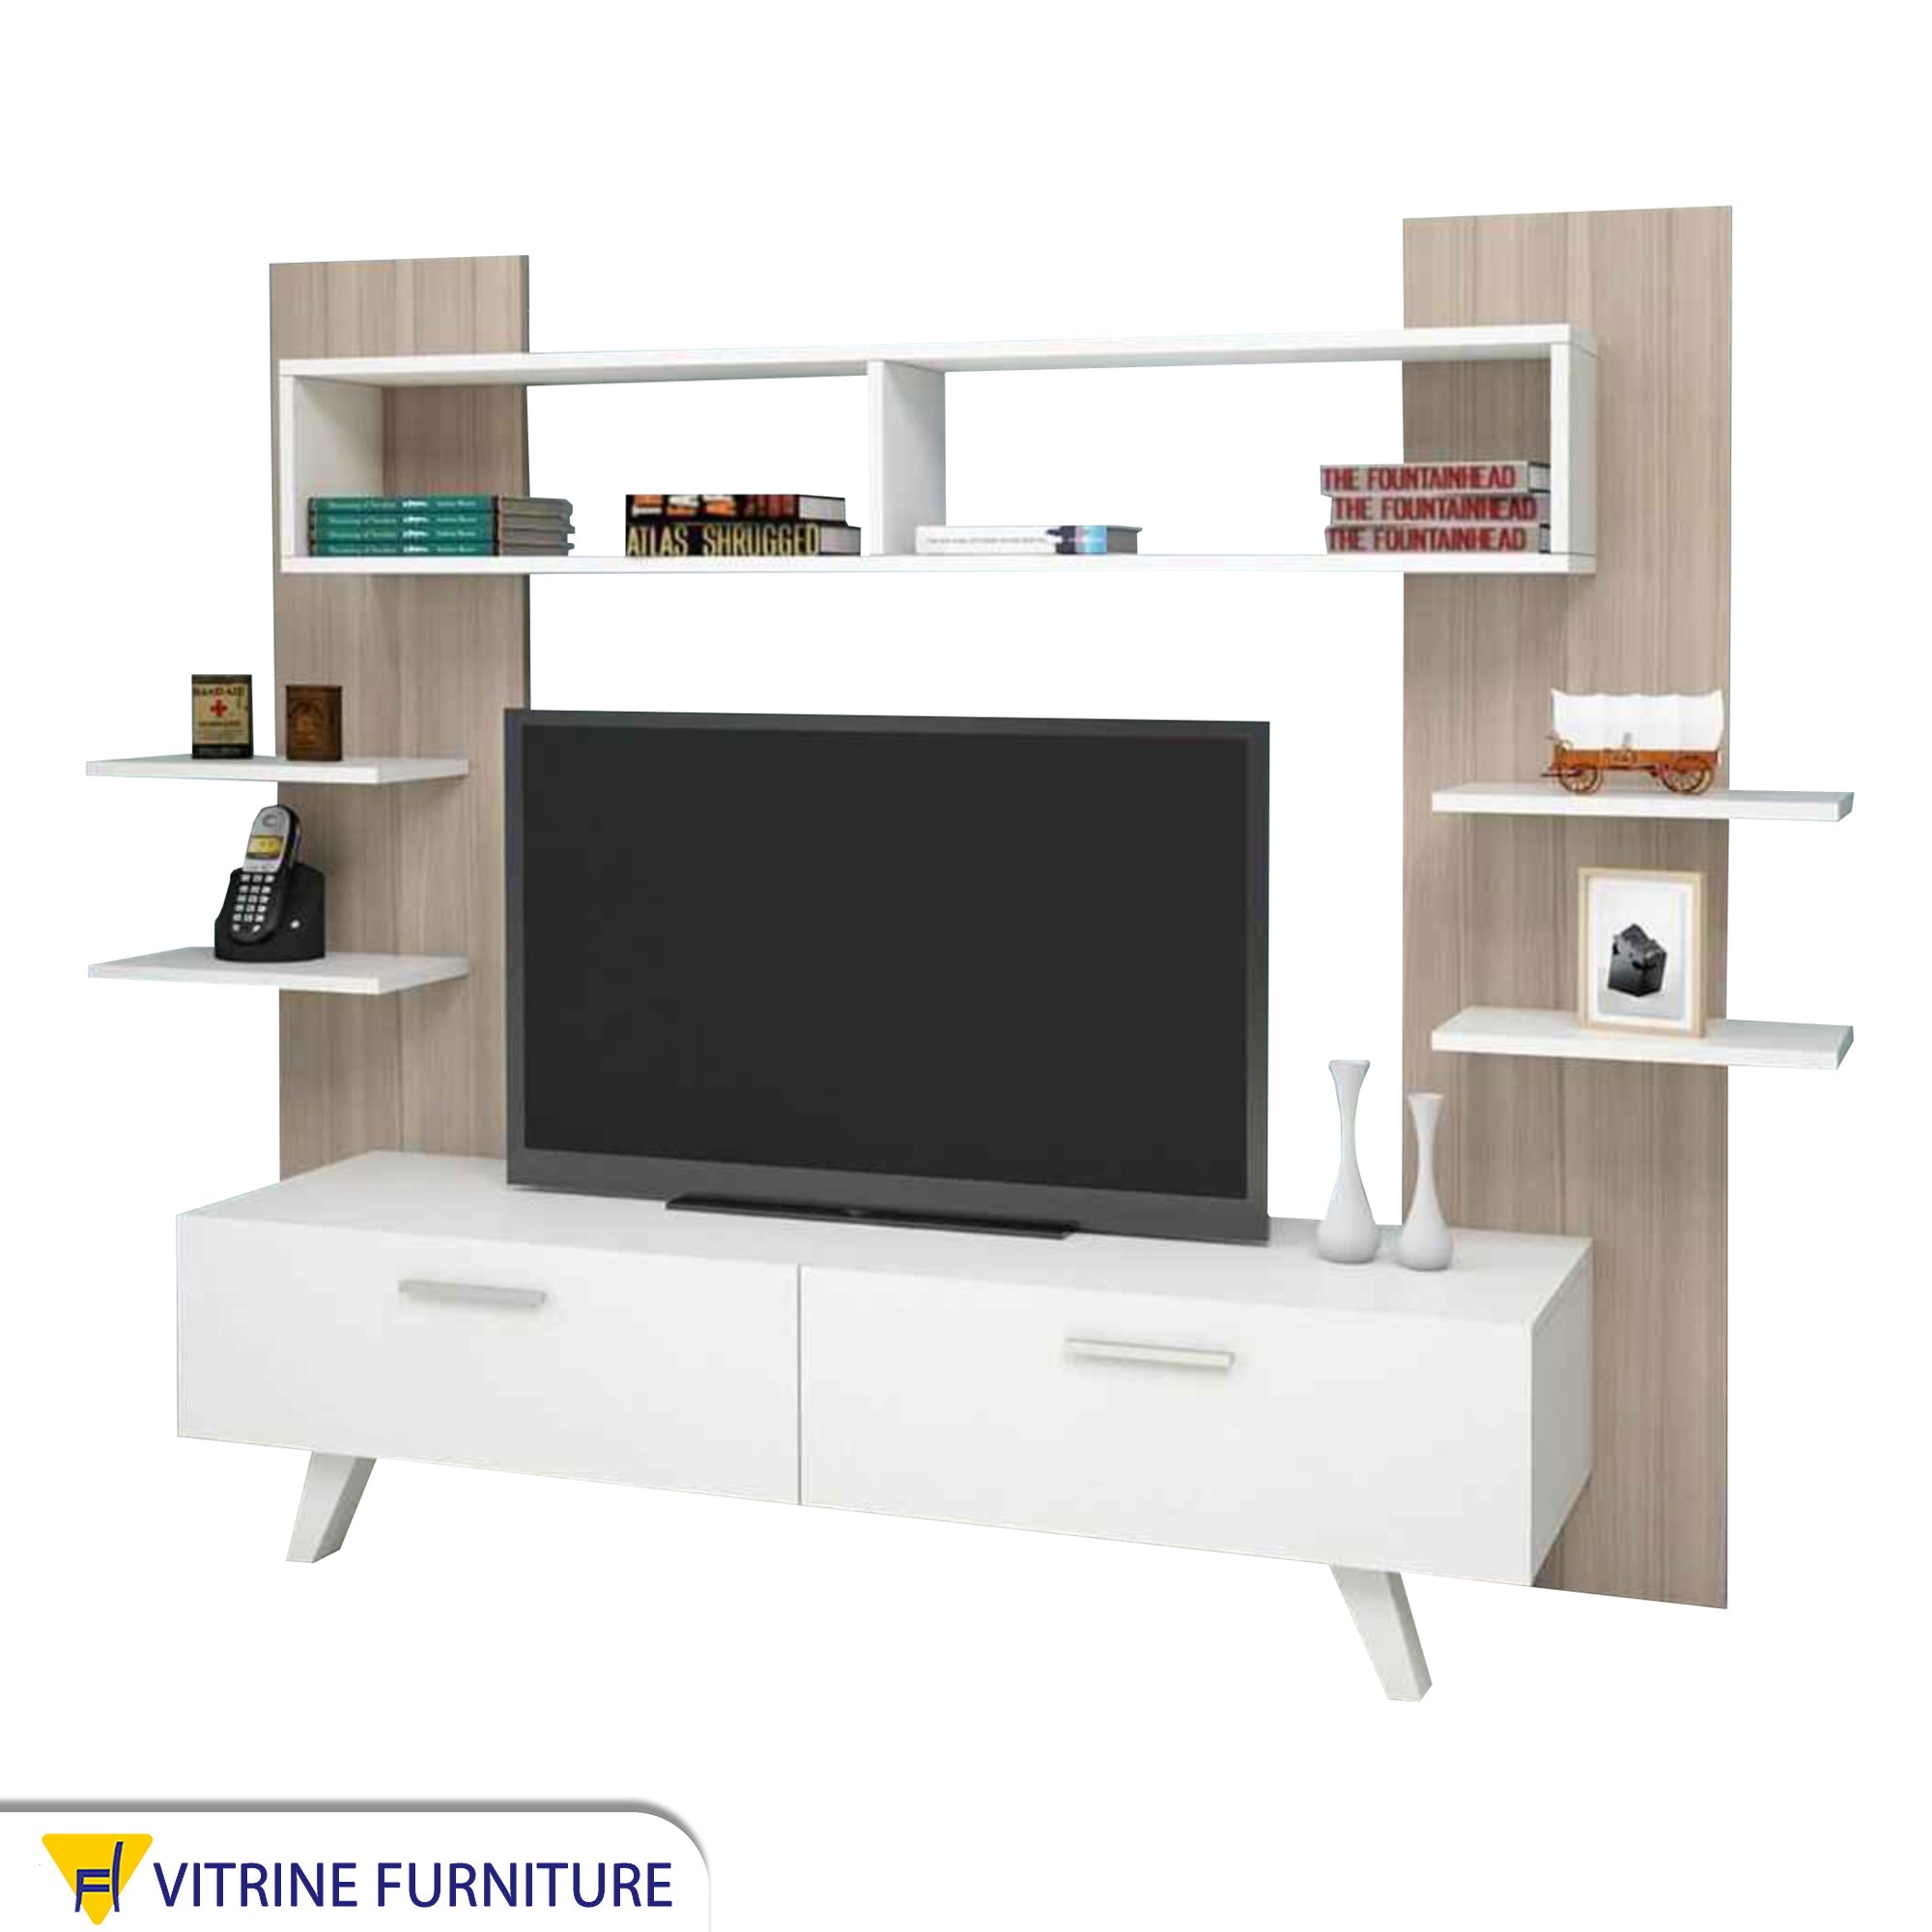 TV cabinet with side shelves